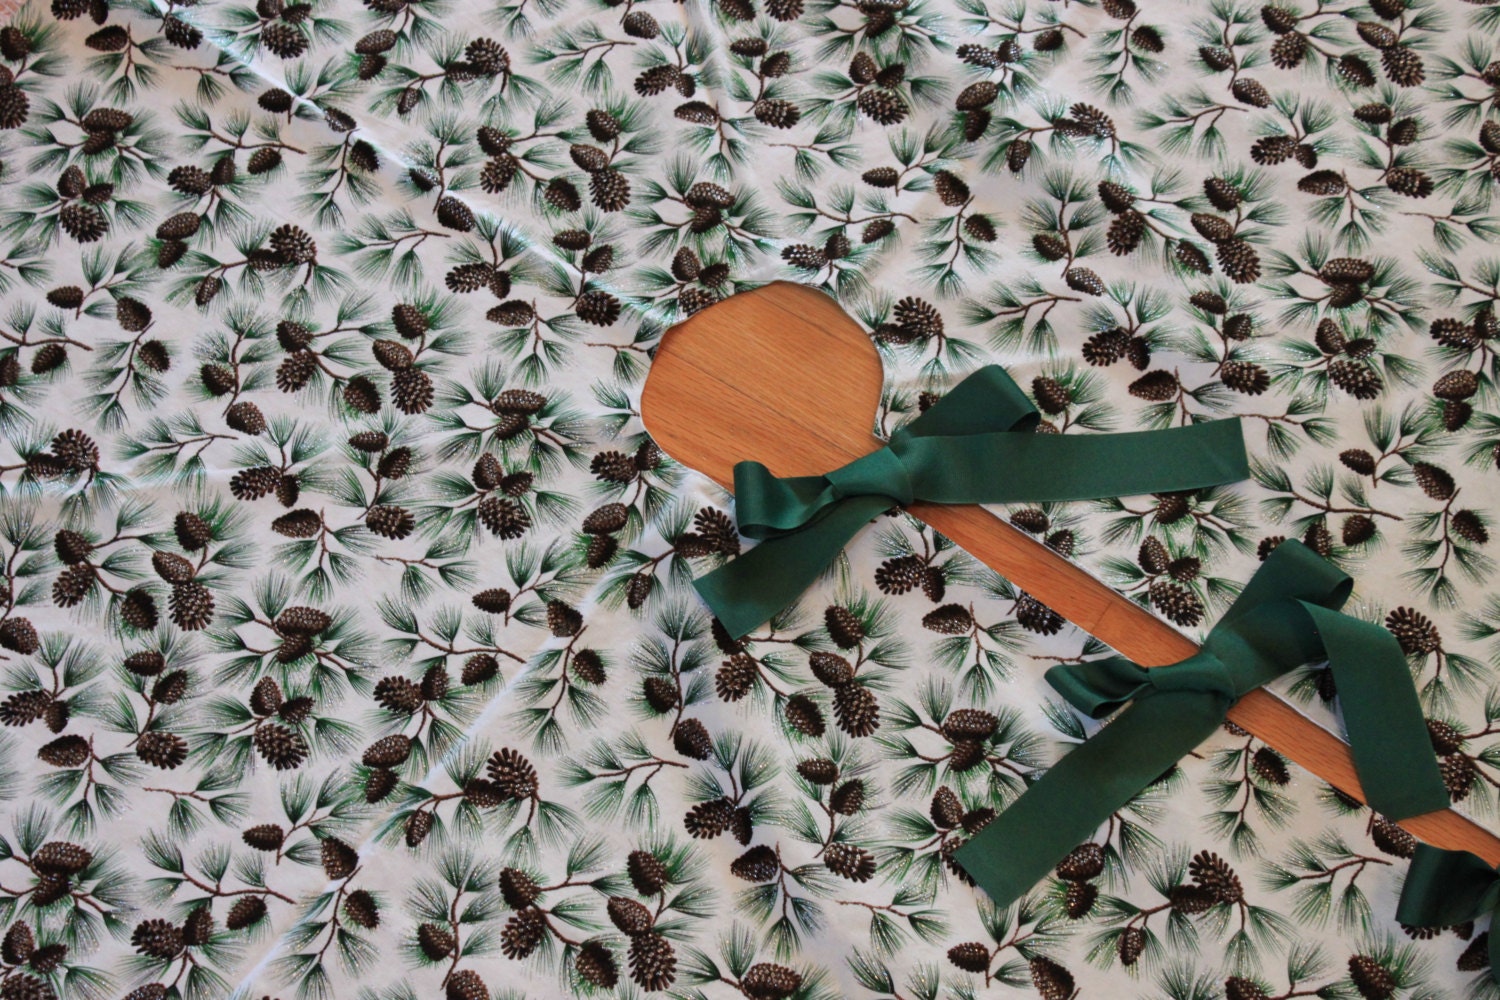 Christmas Tree Skirt - Handmade 42in Glittery Pine cones on white with white lace trim and forest green ribbon ties